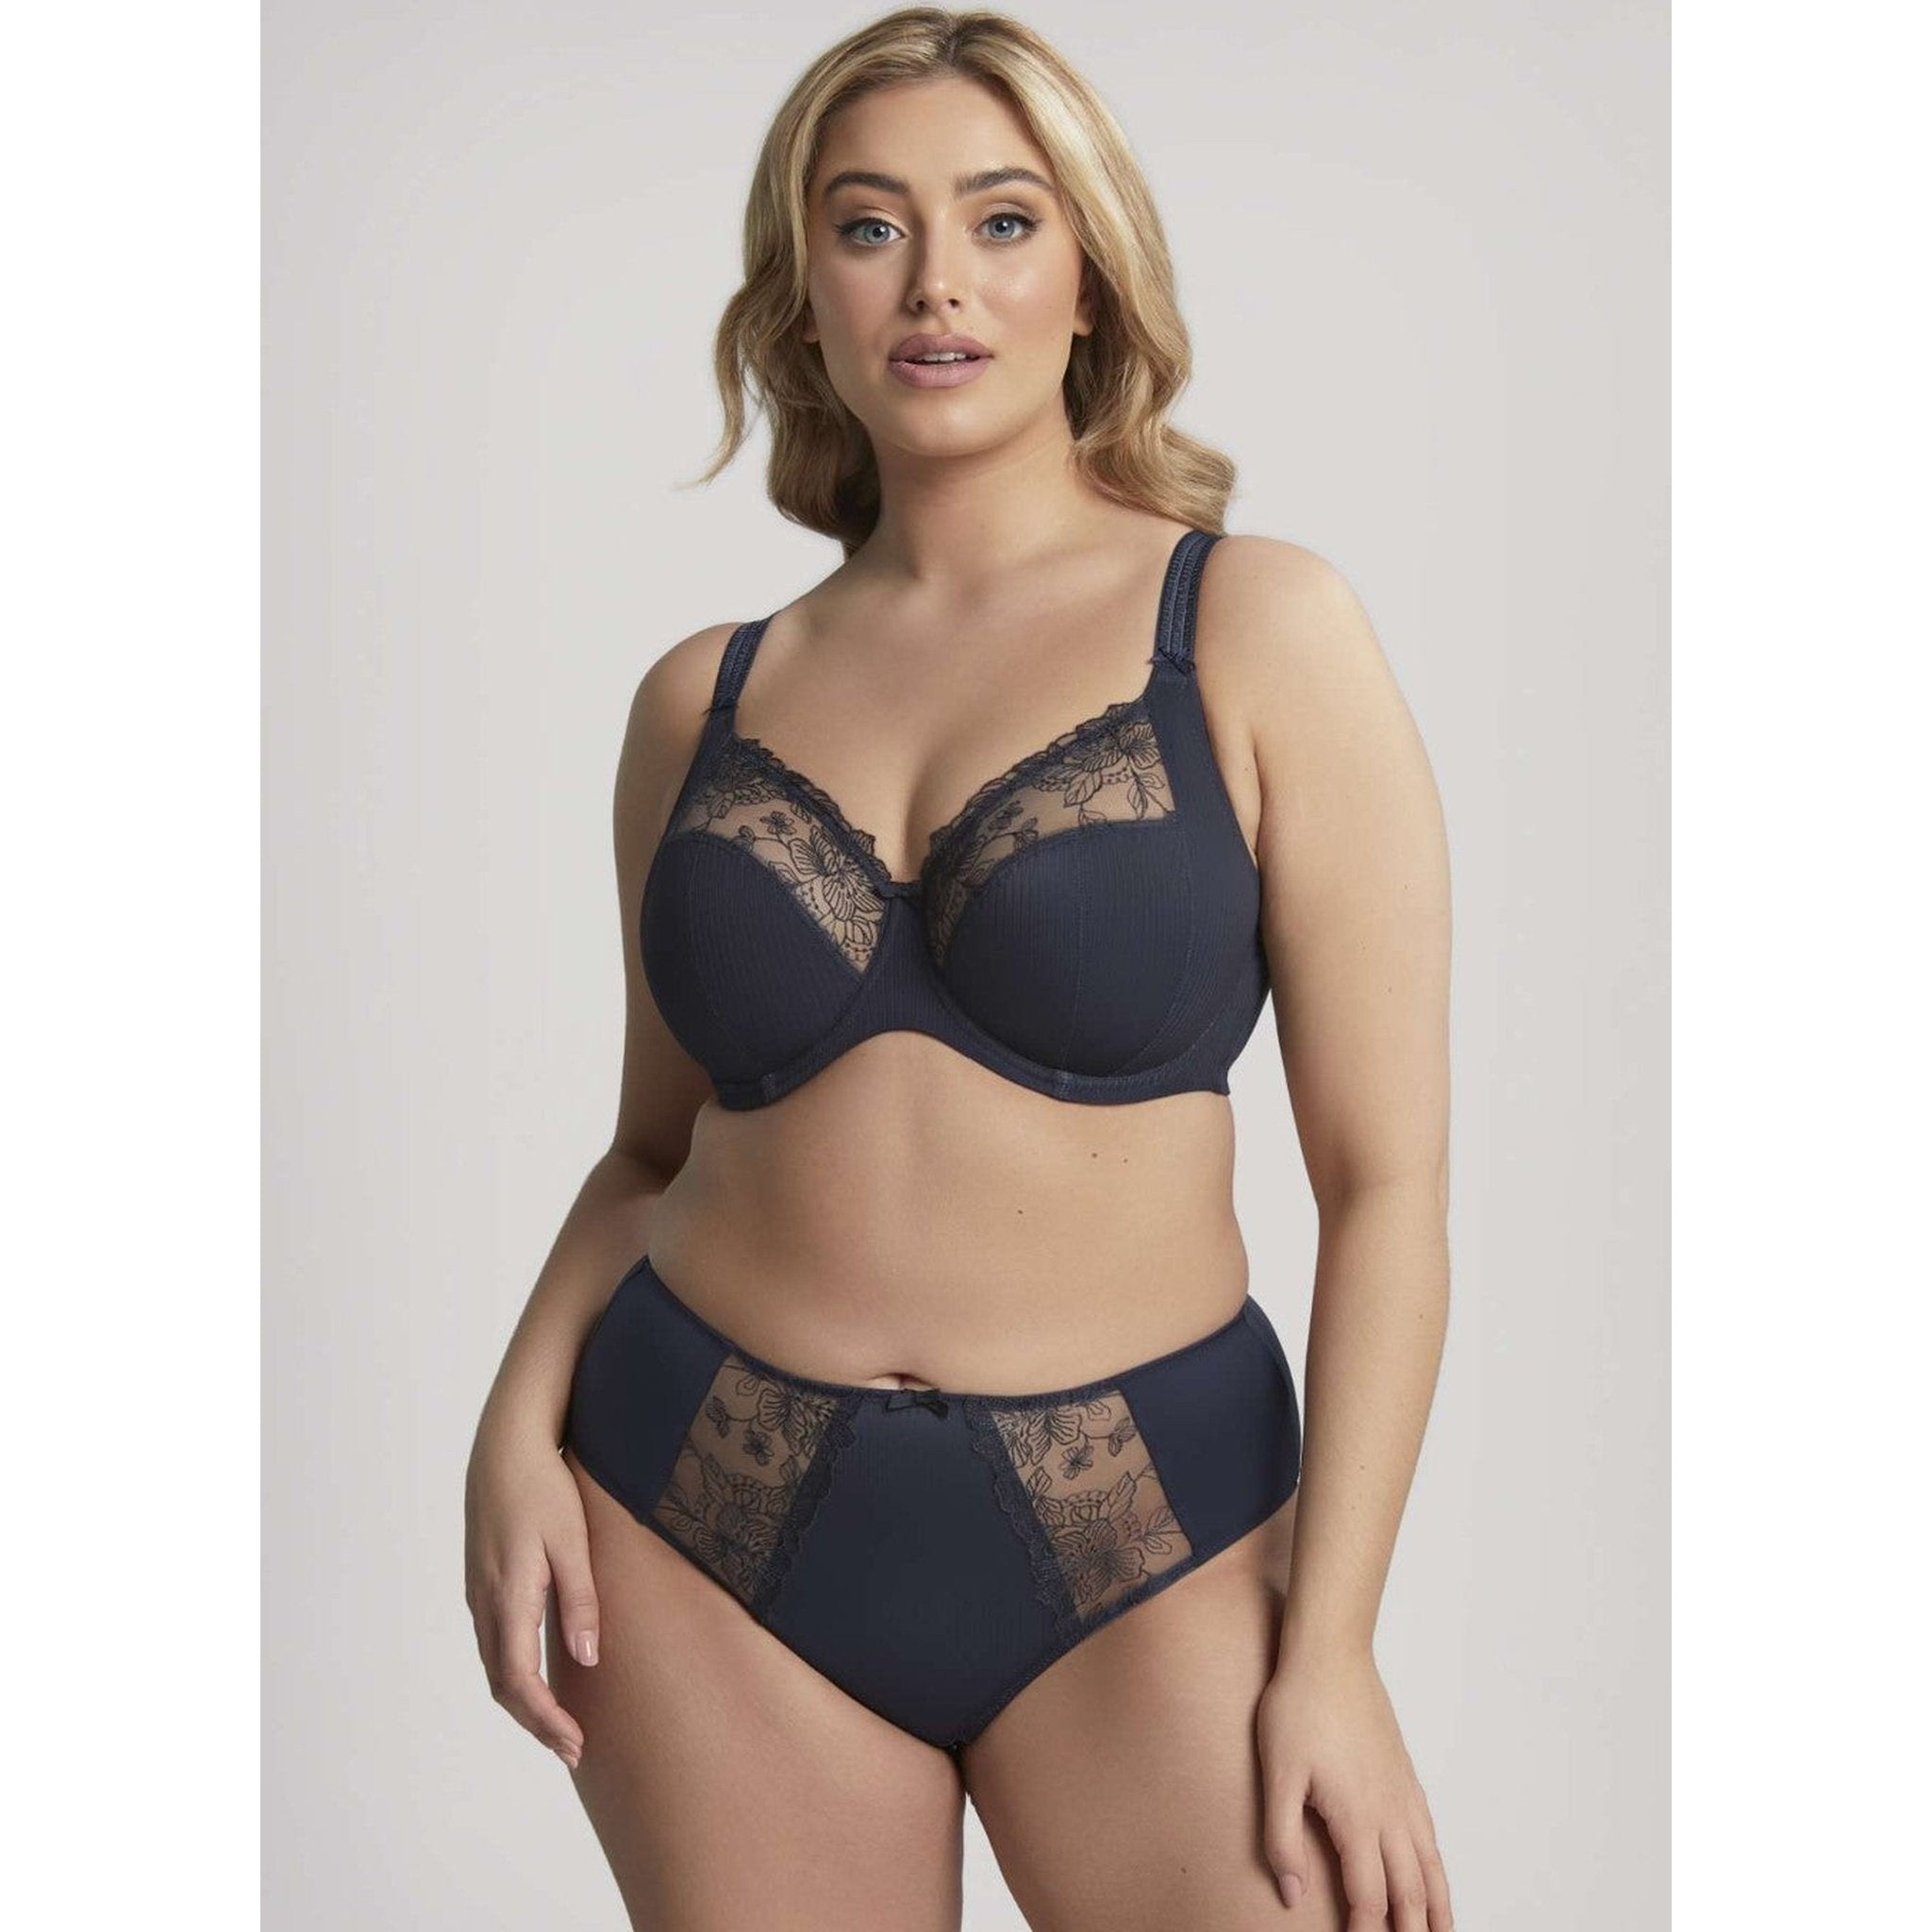 Sculptresse Karis Full Support Bra in Midnight color featuring lace detailing